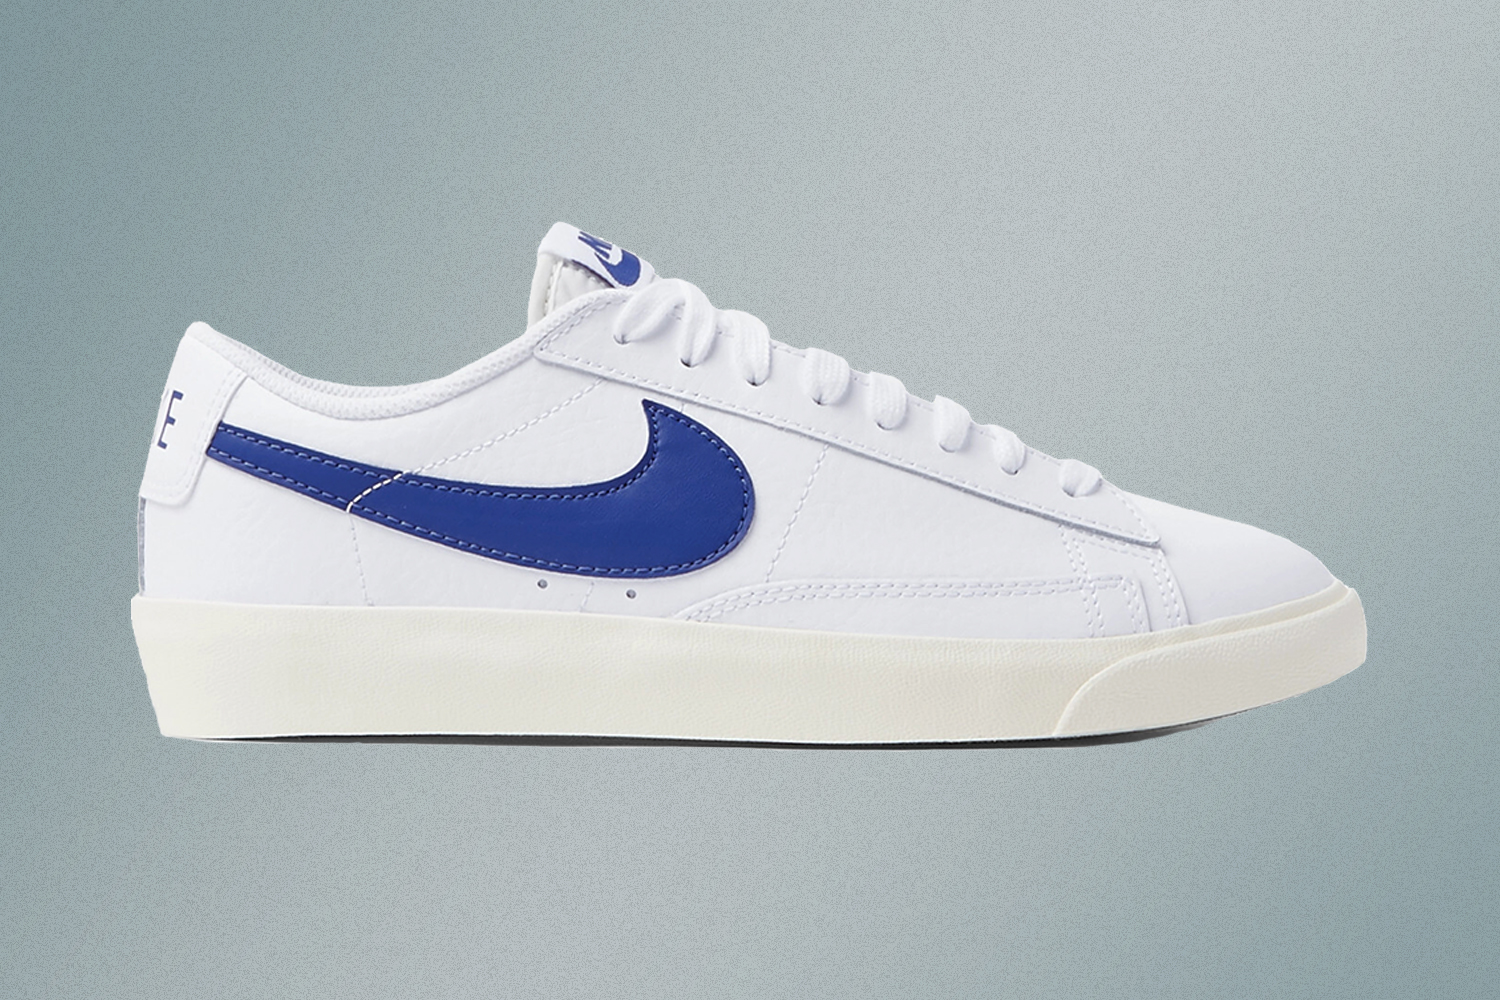 Opponent Decorative Accordingly Classic Nike Blazer Sneakers Are on Sale at Mr Porter - InsideHook